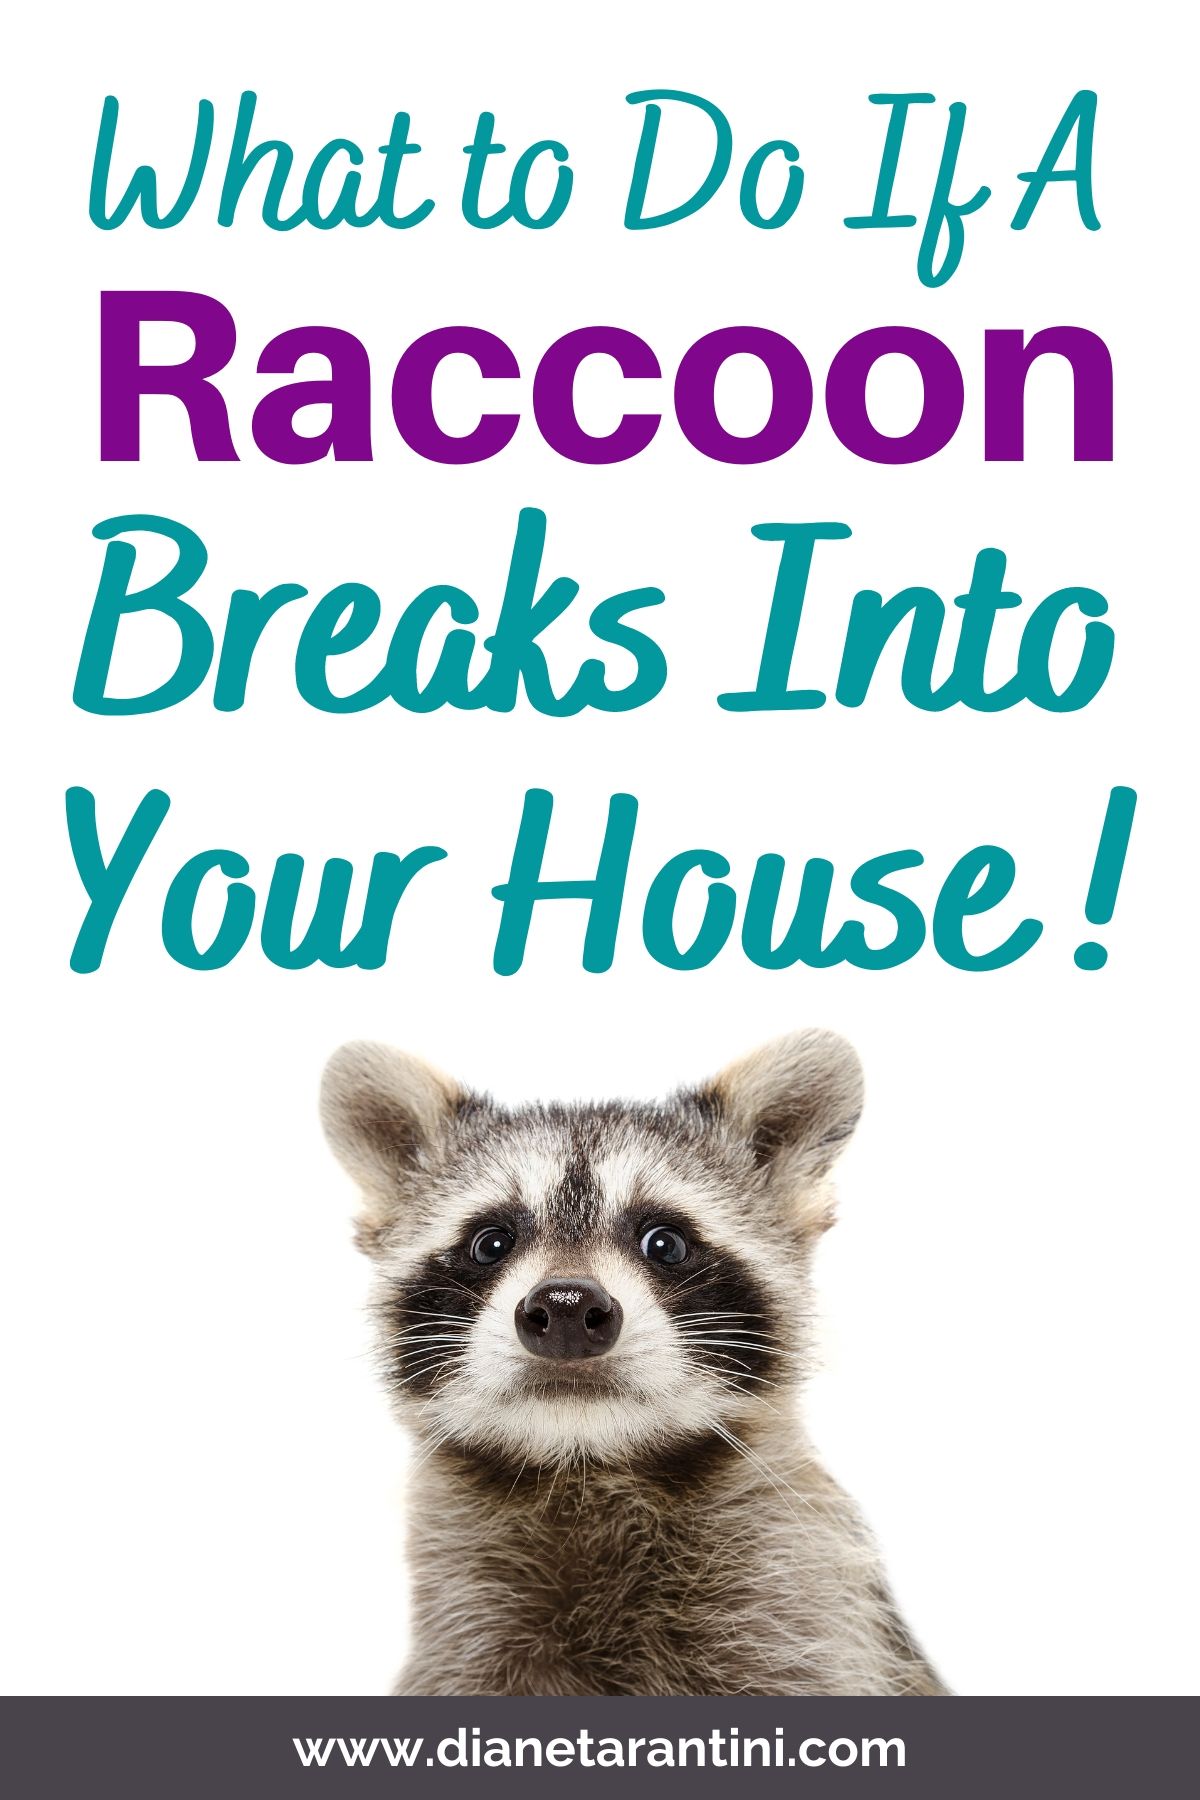 What to do if a raccoon breaks into your house!